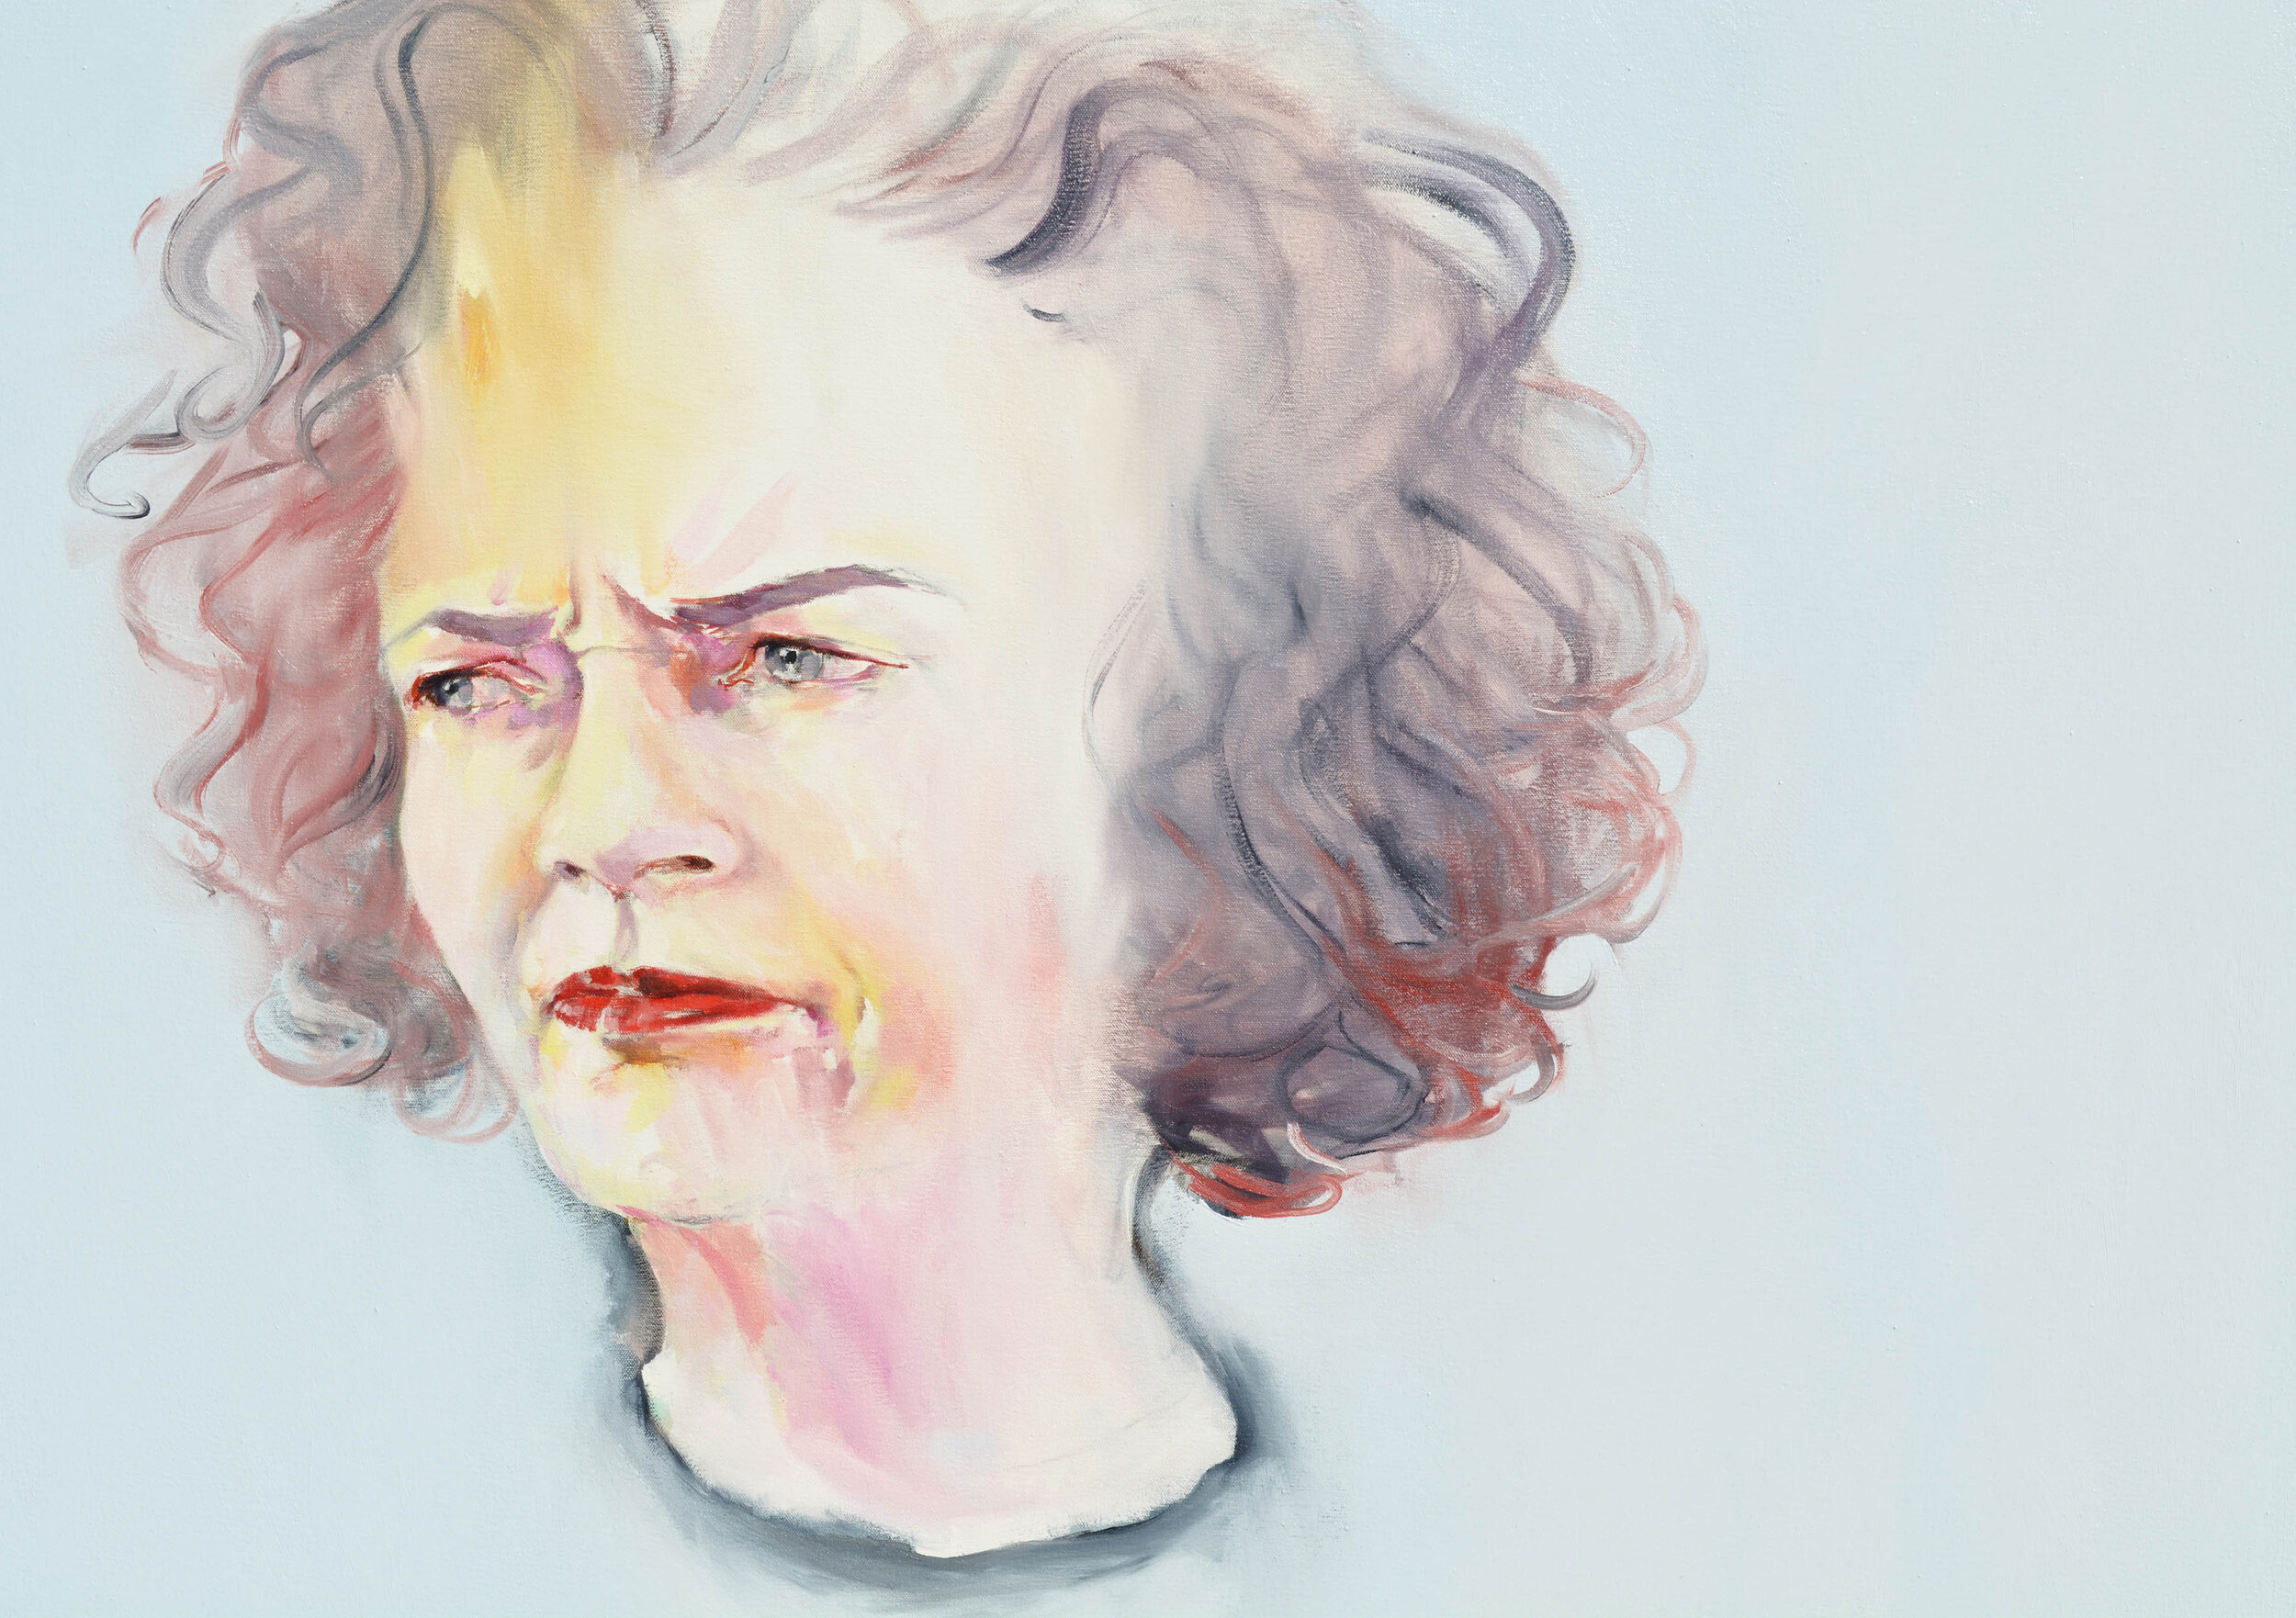 If you don't laugh you'll cry (Judith Lucy)